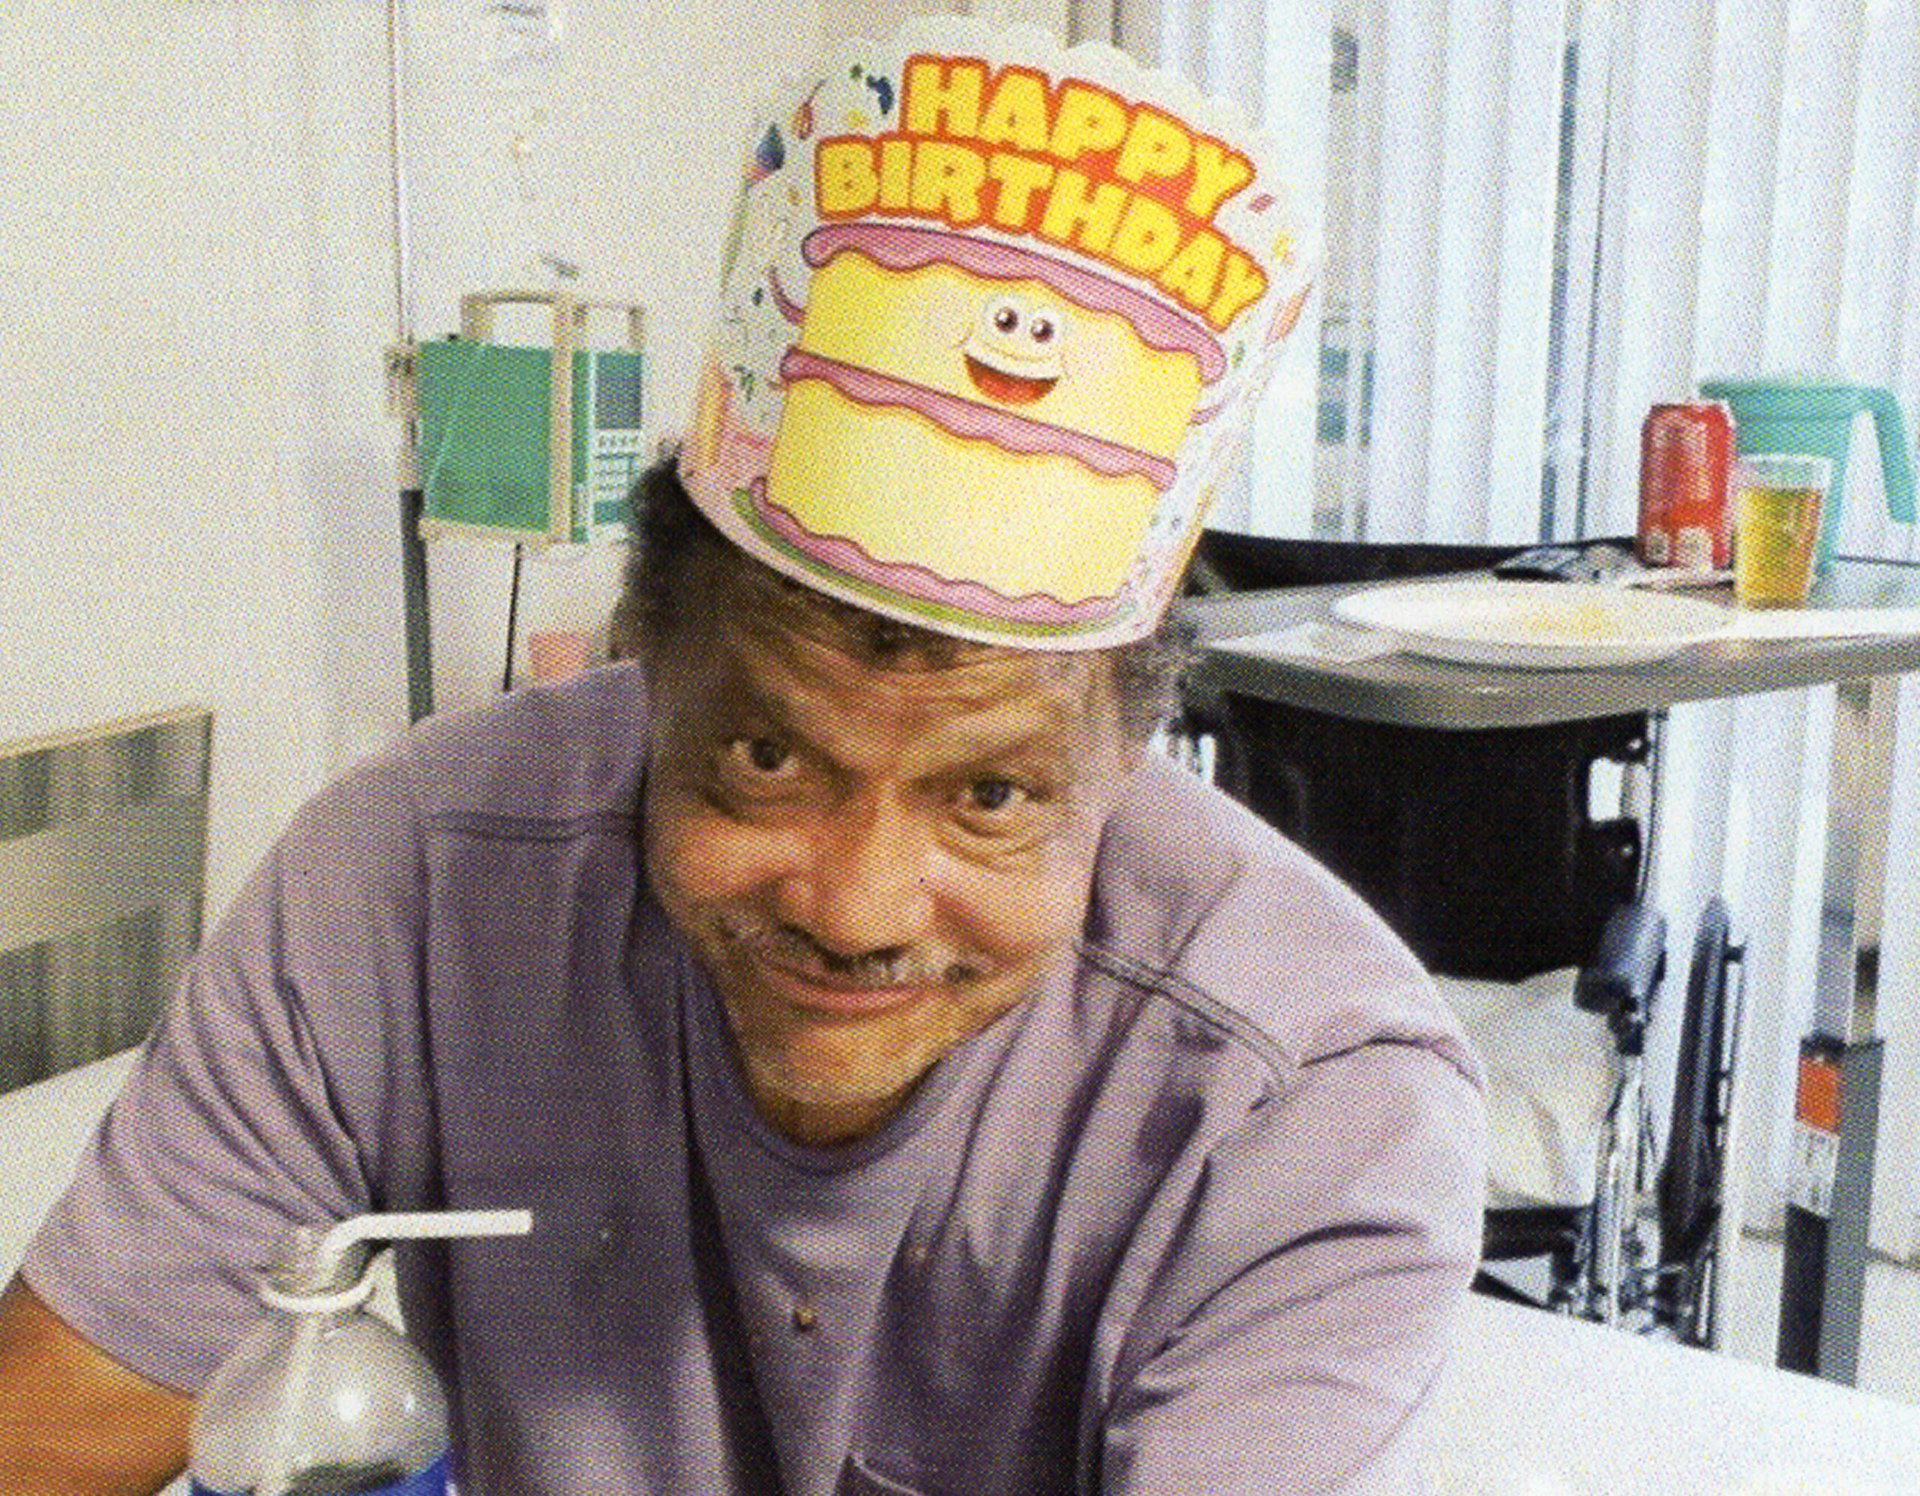 Andre Butler smiles wearing a "Happy Birthday" hat, in a hospital room.